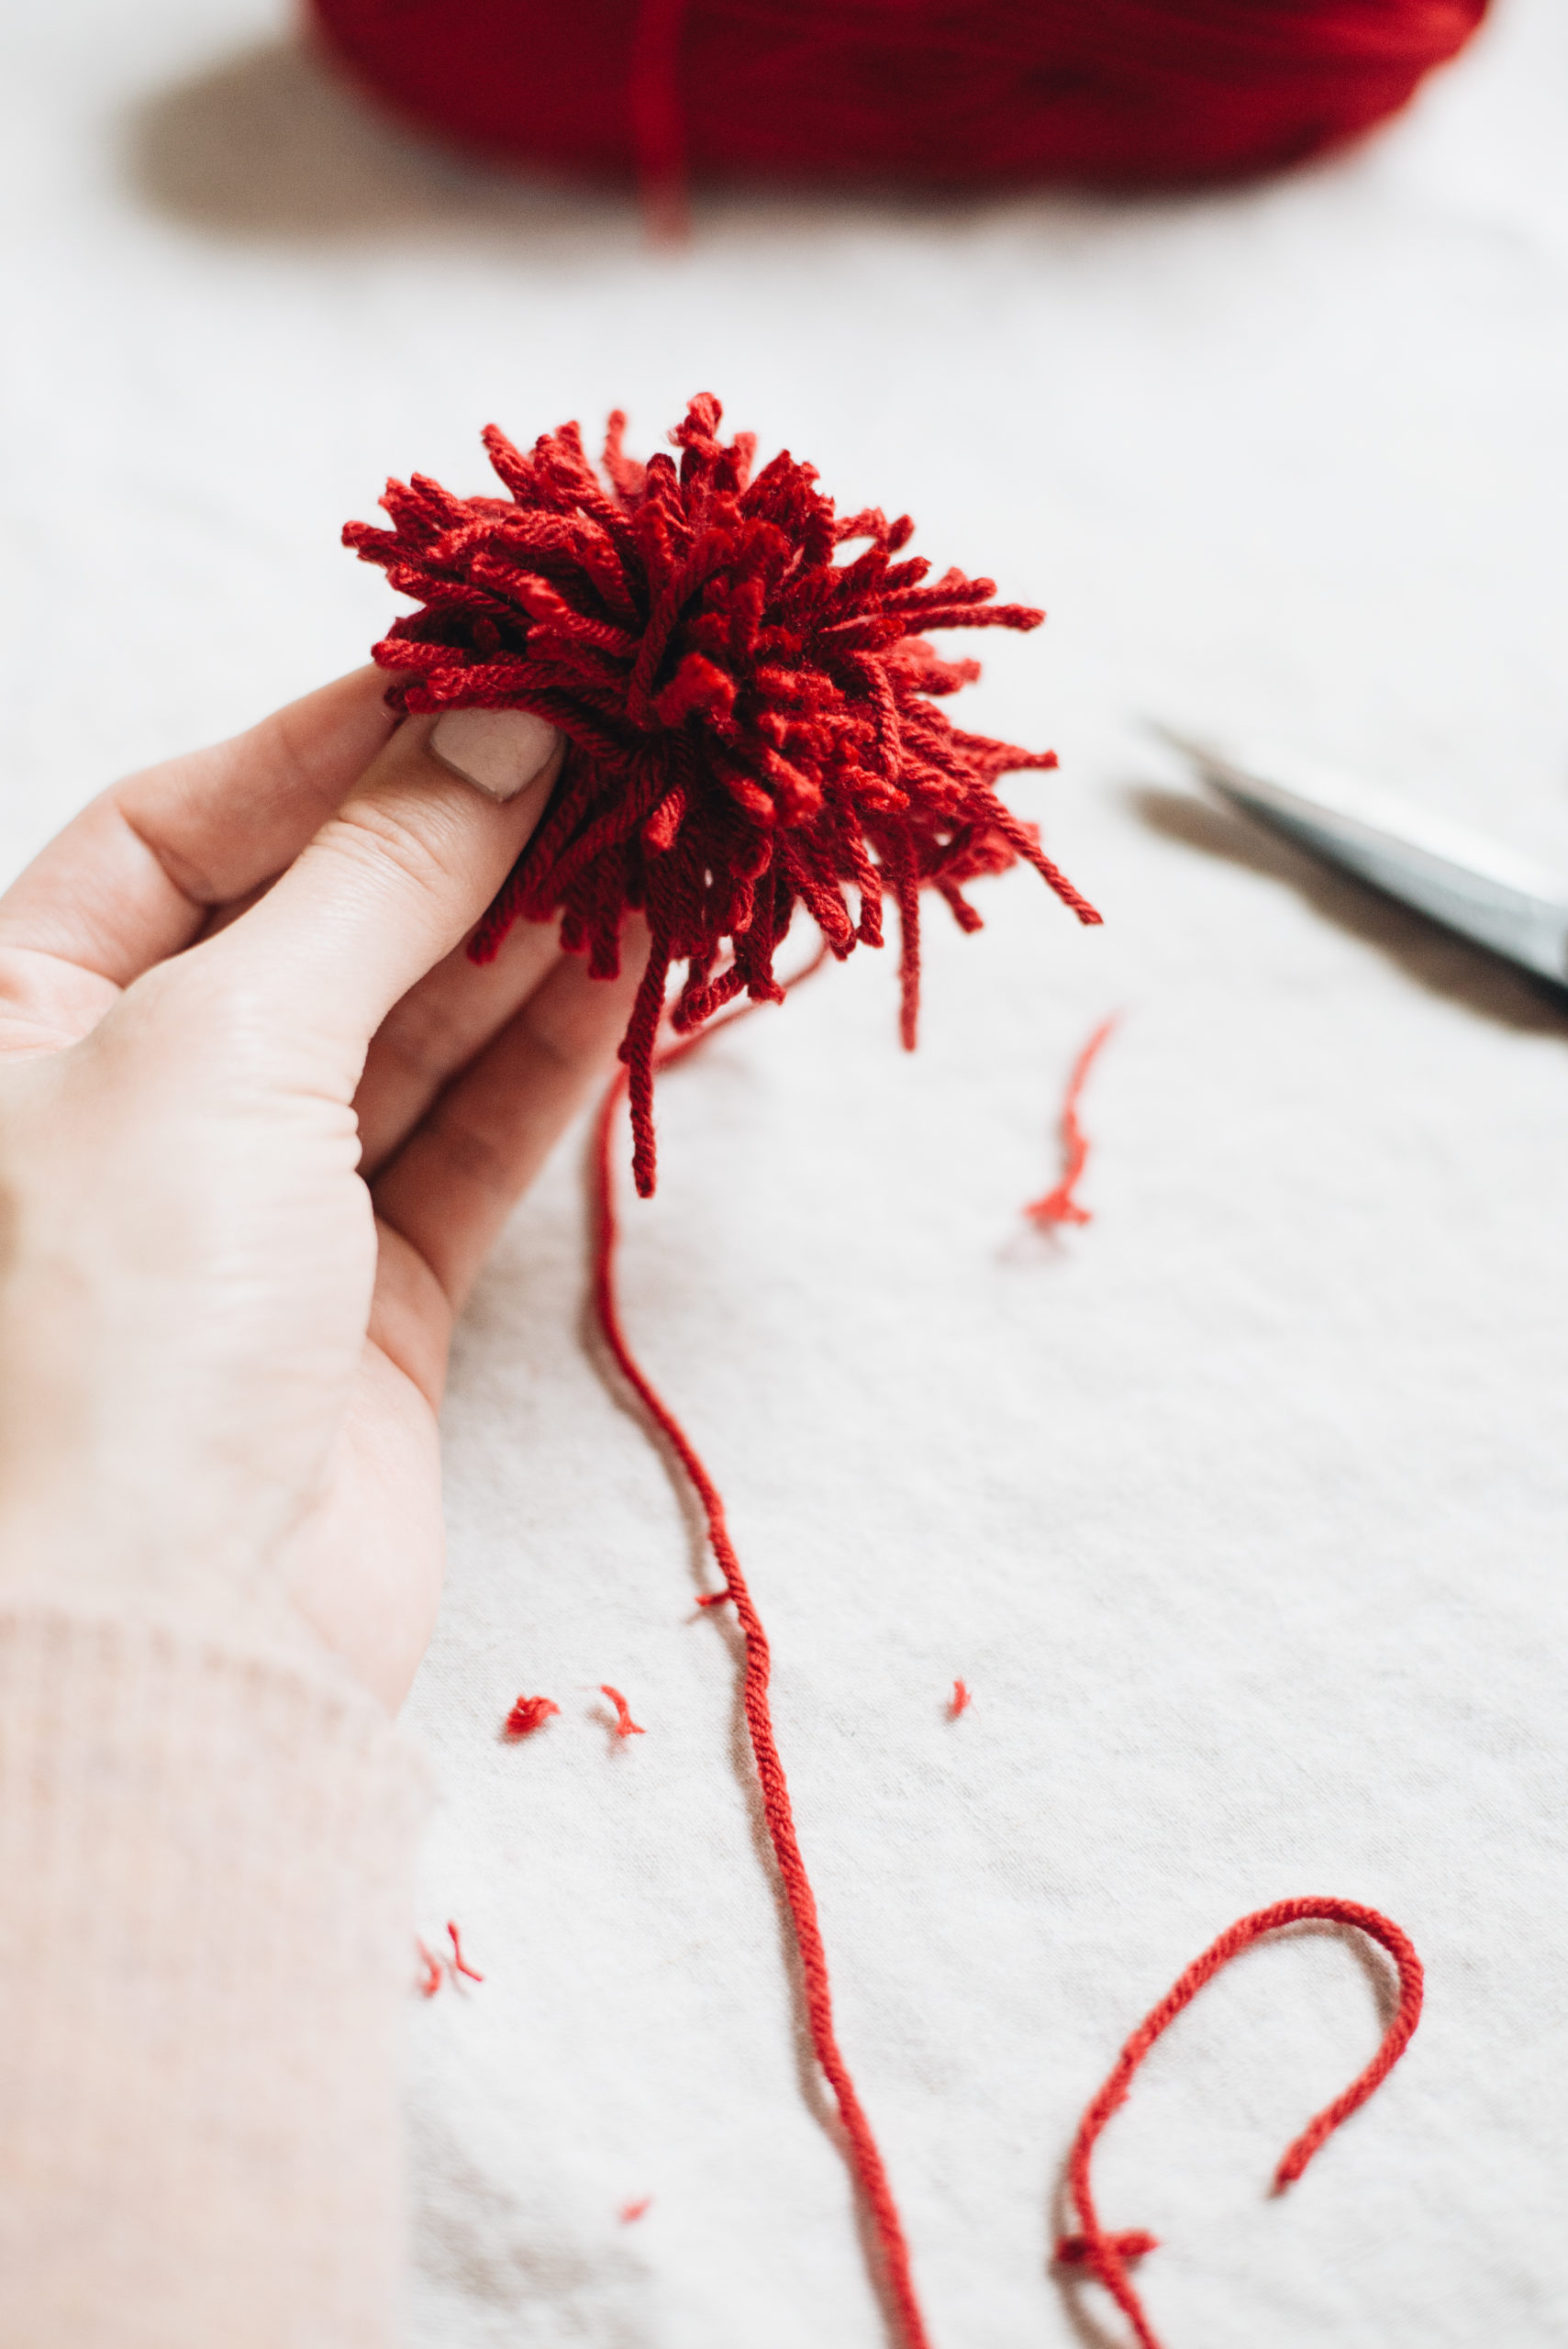 trim the loops of red yarn to make heart pom pom bookmarks